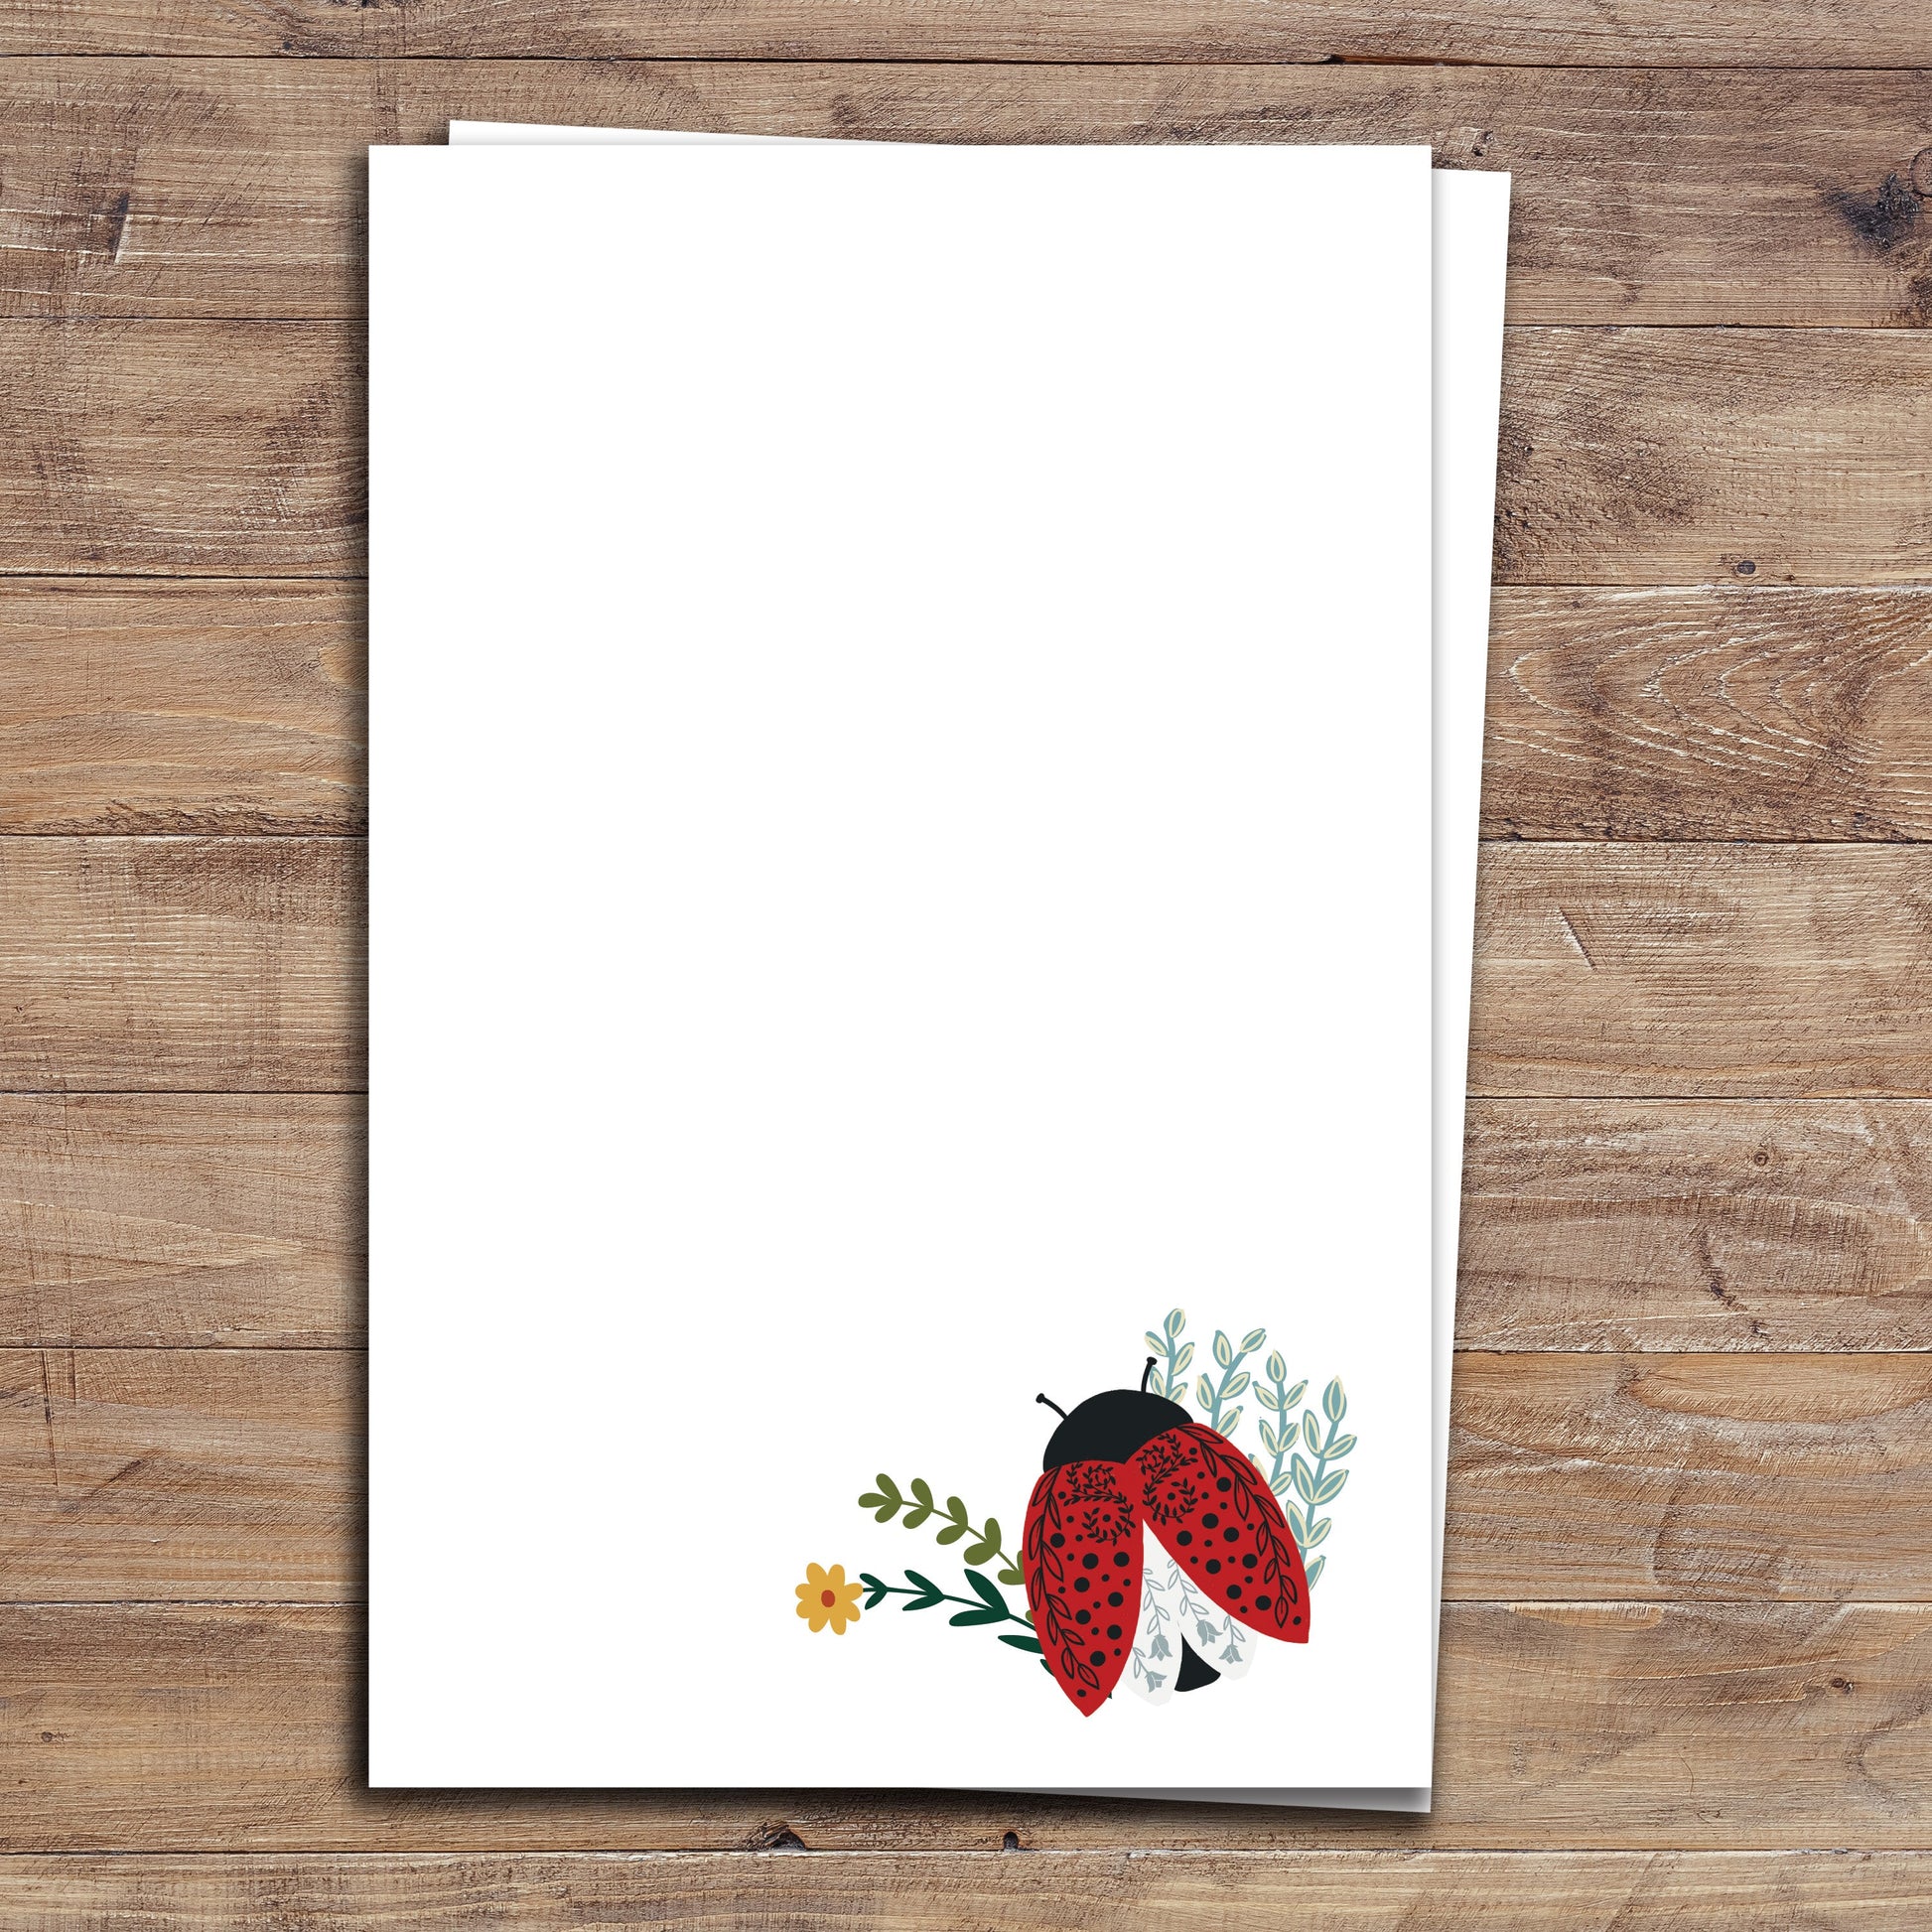 Two Floral Ladybug notepads on wood background